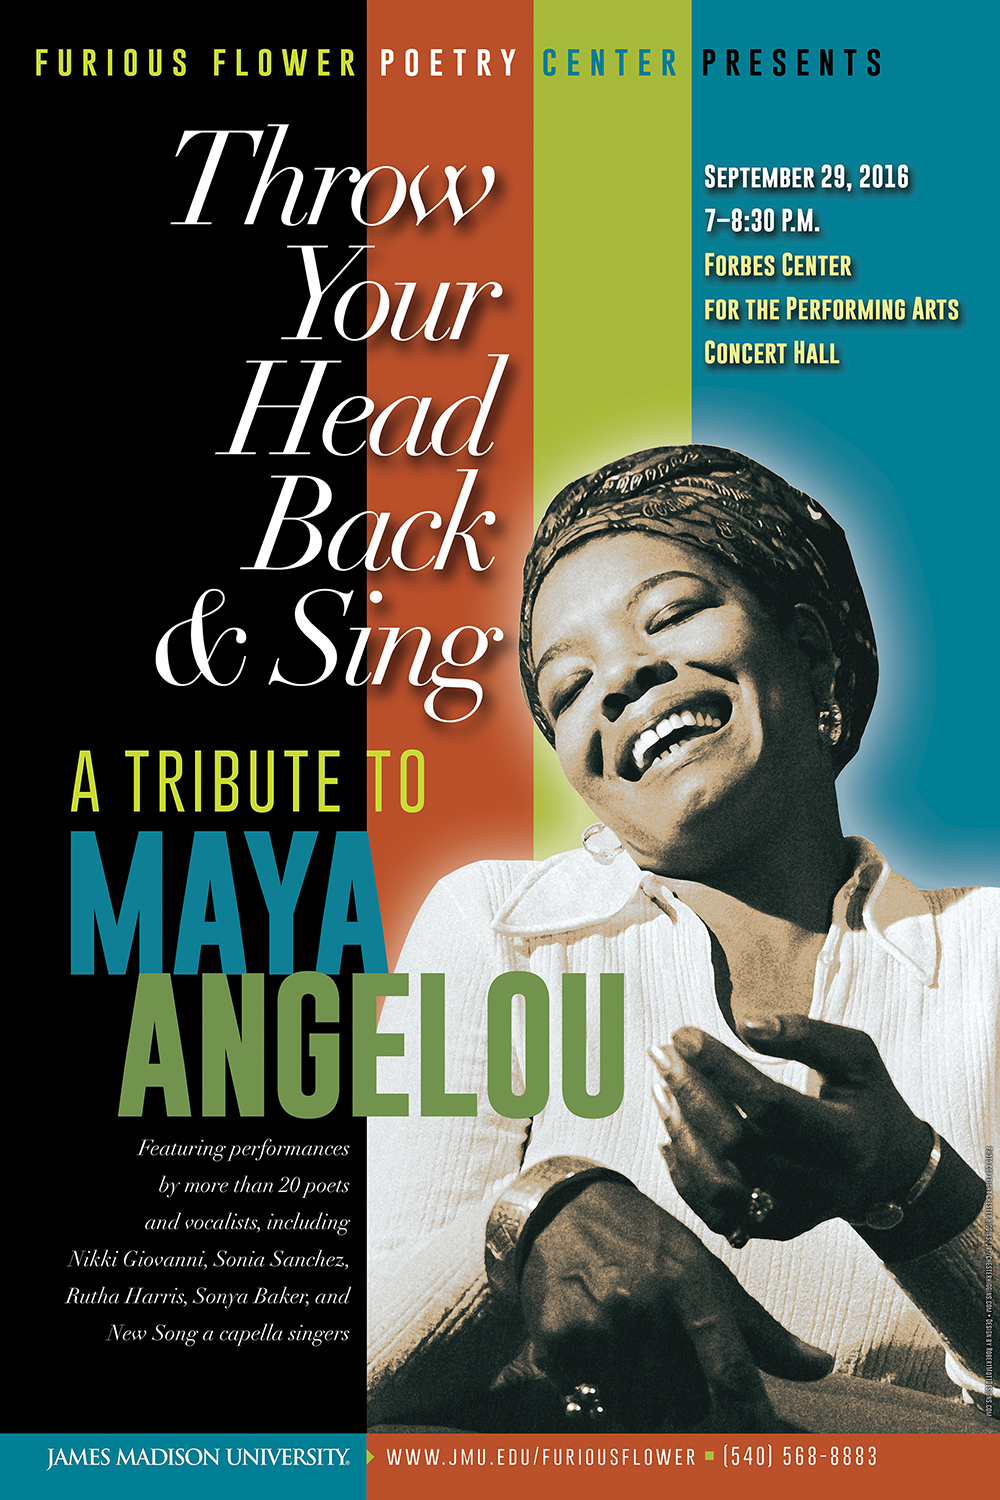 Tribute to Maya Angelou | Furious Flower Poetry Center